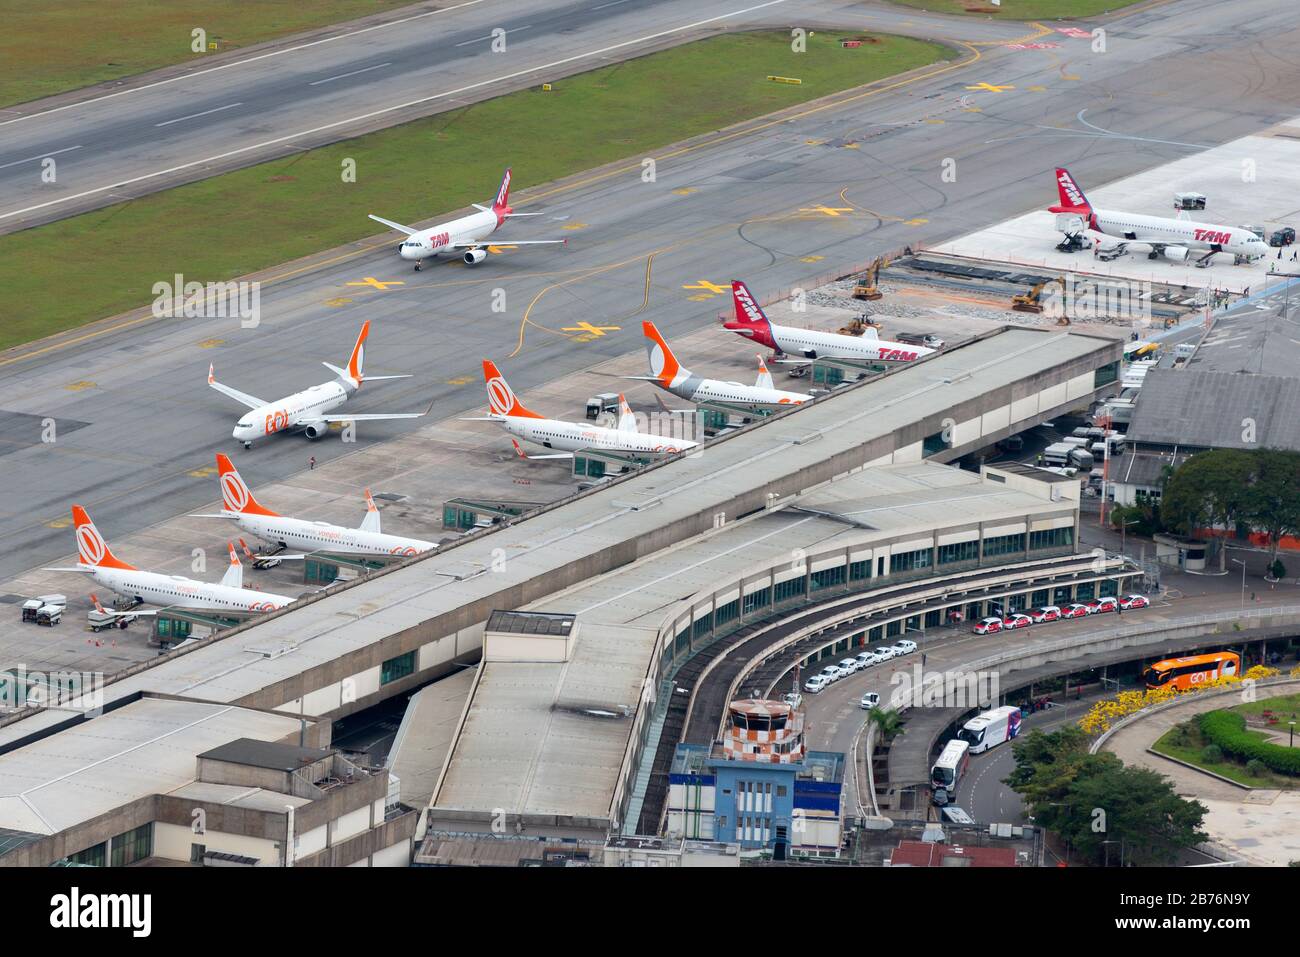 Aerial overview of Congonhas Airport (CGH / SBSP) in Sao Paulo, Brazil administered by INFRAERO. Busy airport terminal used for domestic flights. Stock Photo